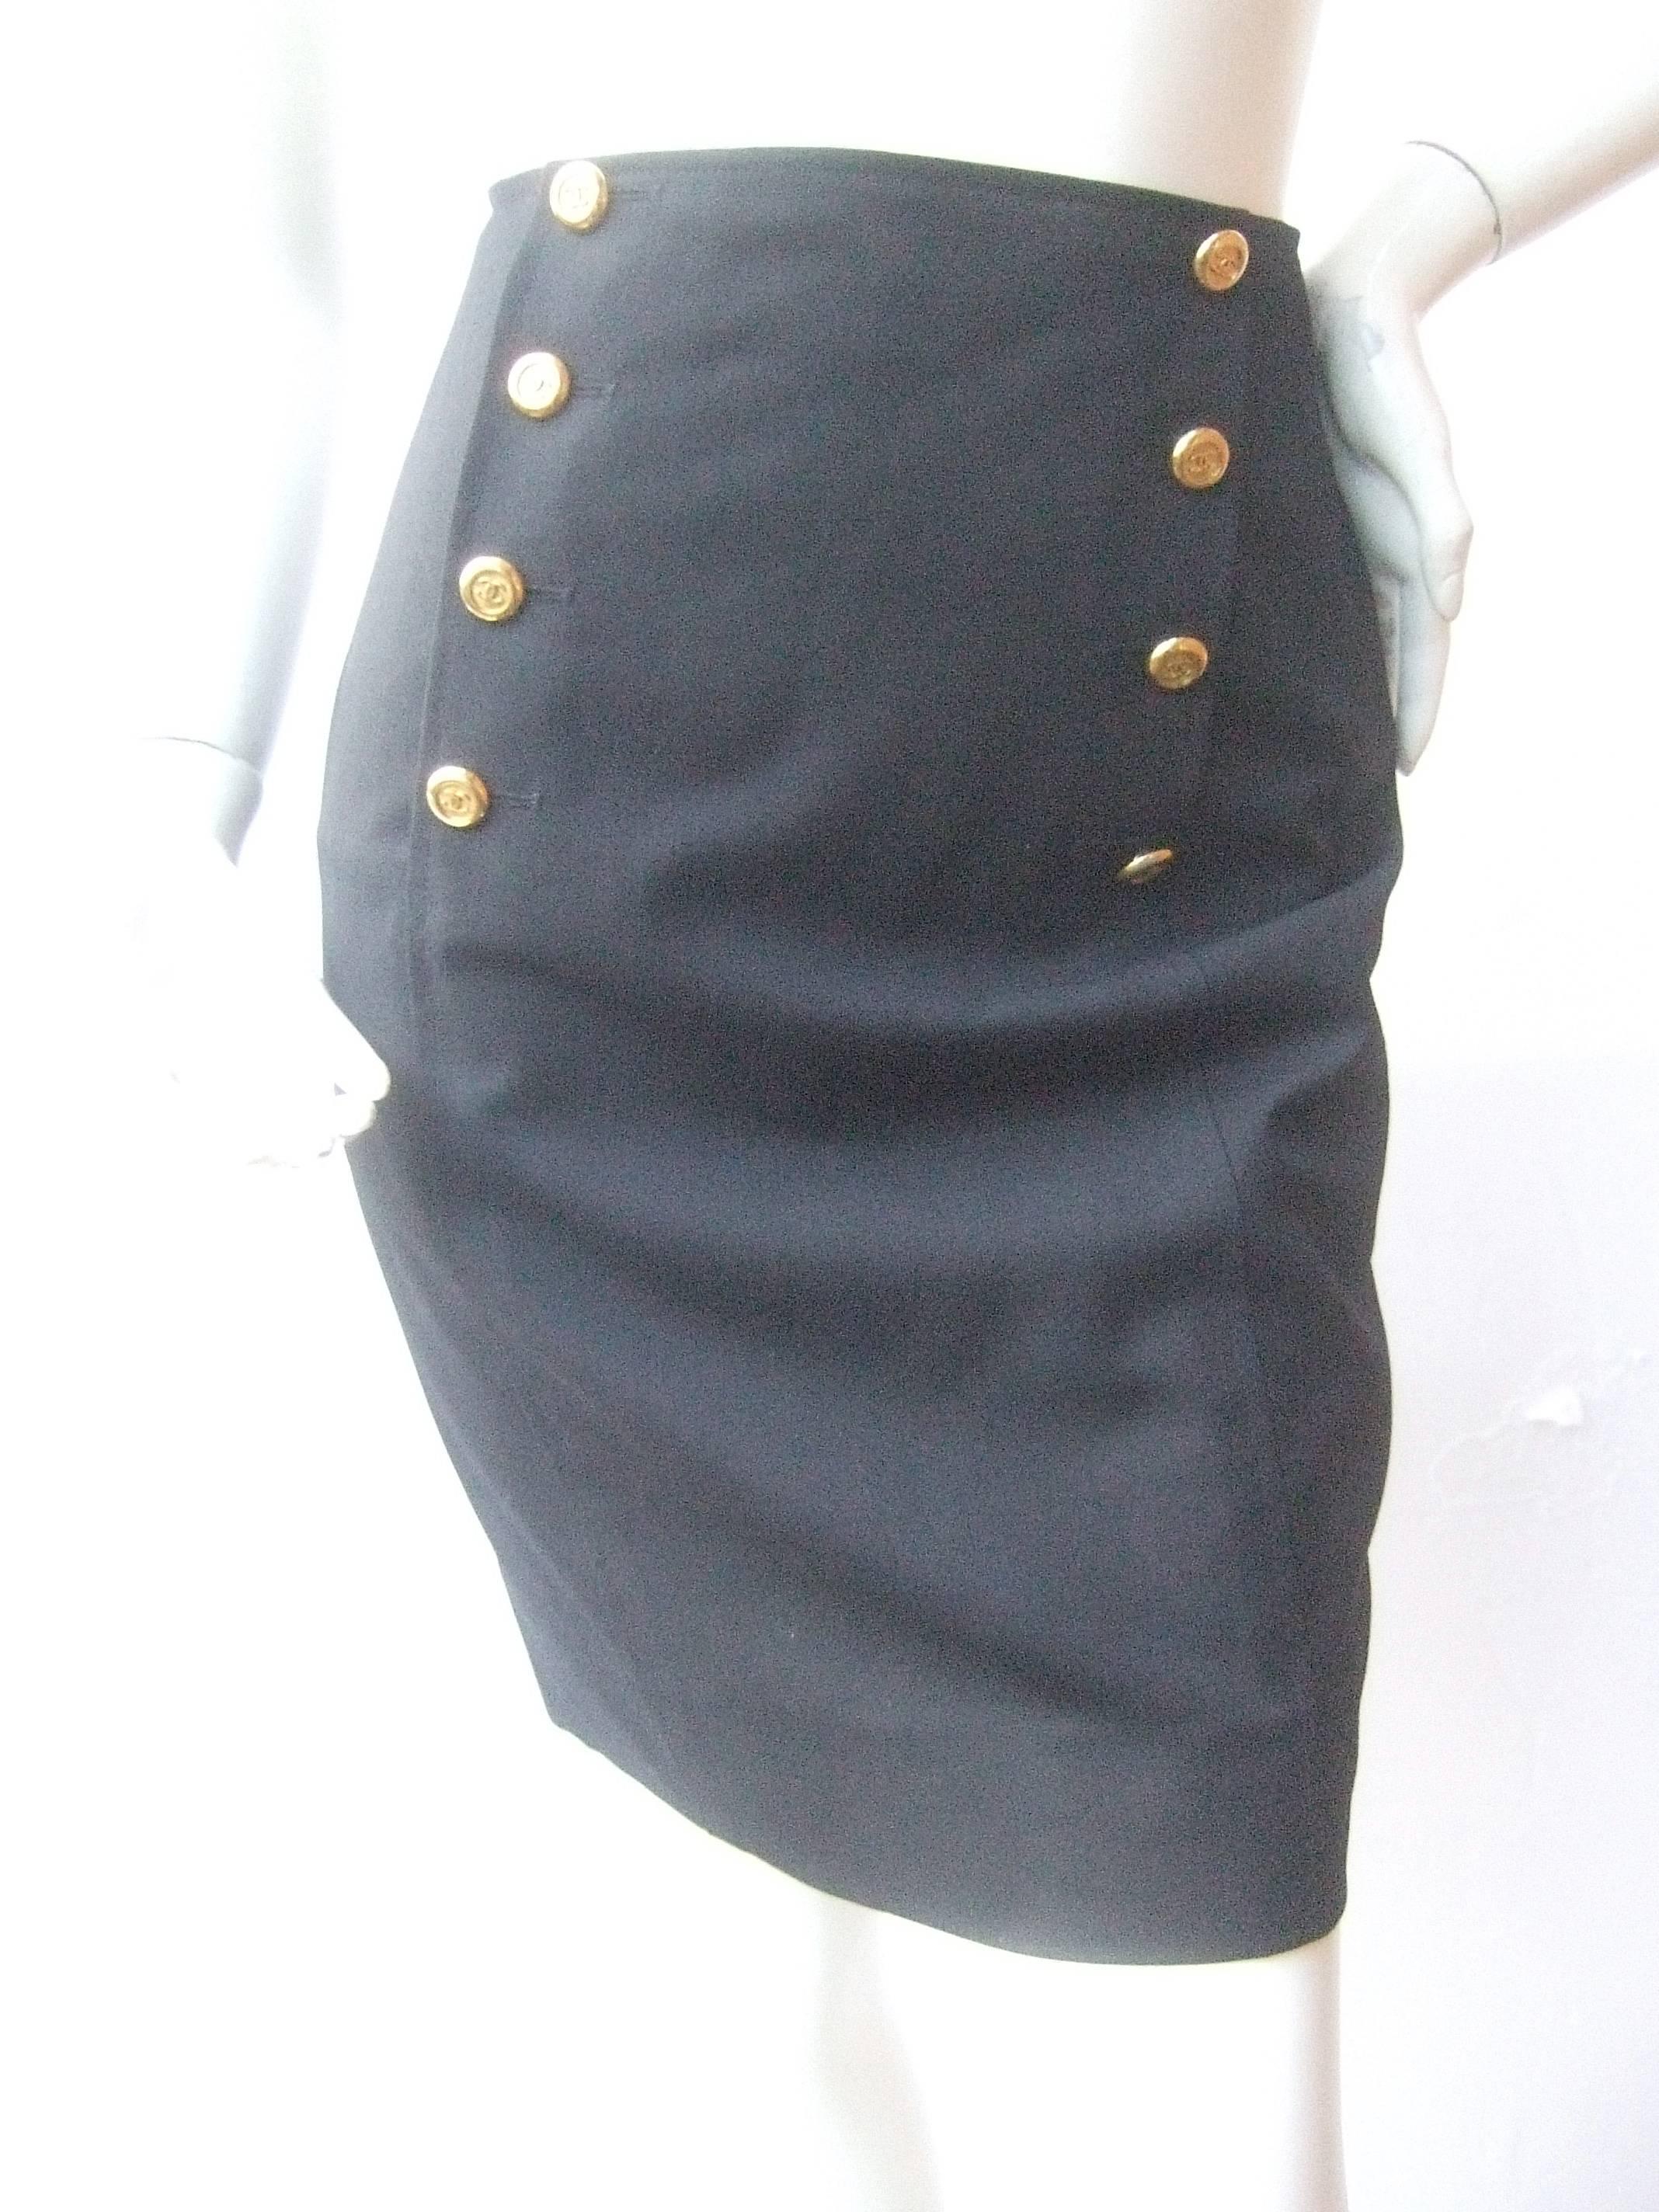 Chanel Boutique Dark blue wool pencil skirt Size 40
The classic designer light wool skirt has a nautical
influence with eight gilt metal C.C logo buttons 

The chic skirt is designed with a small kick pleat
slit on the center backside. Lined in